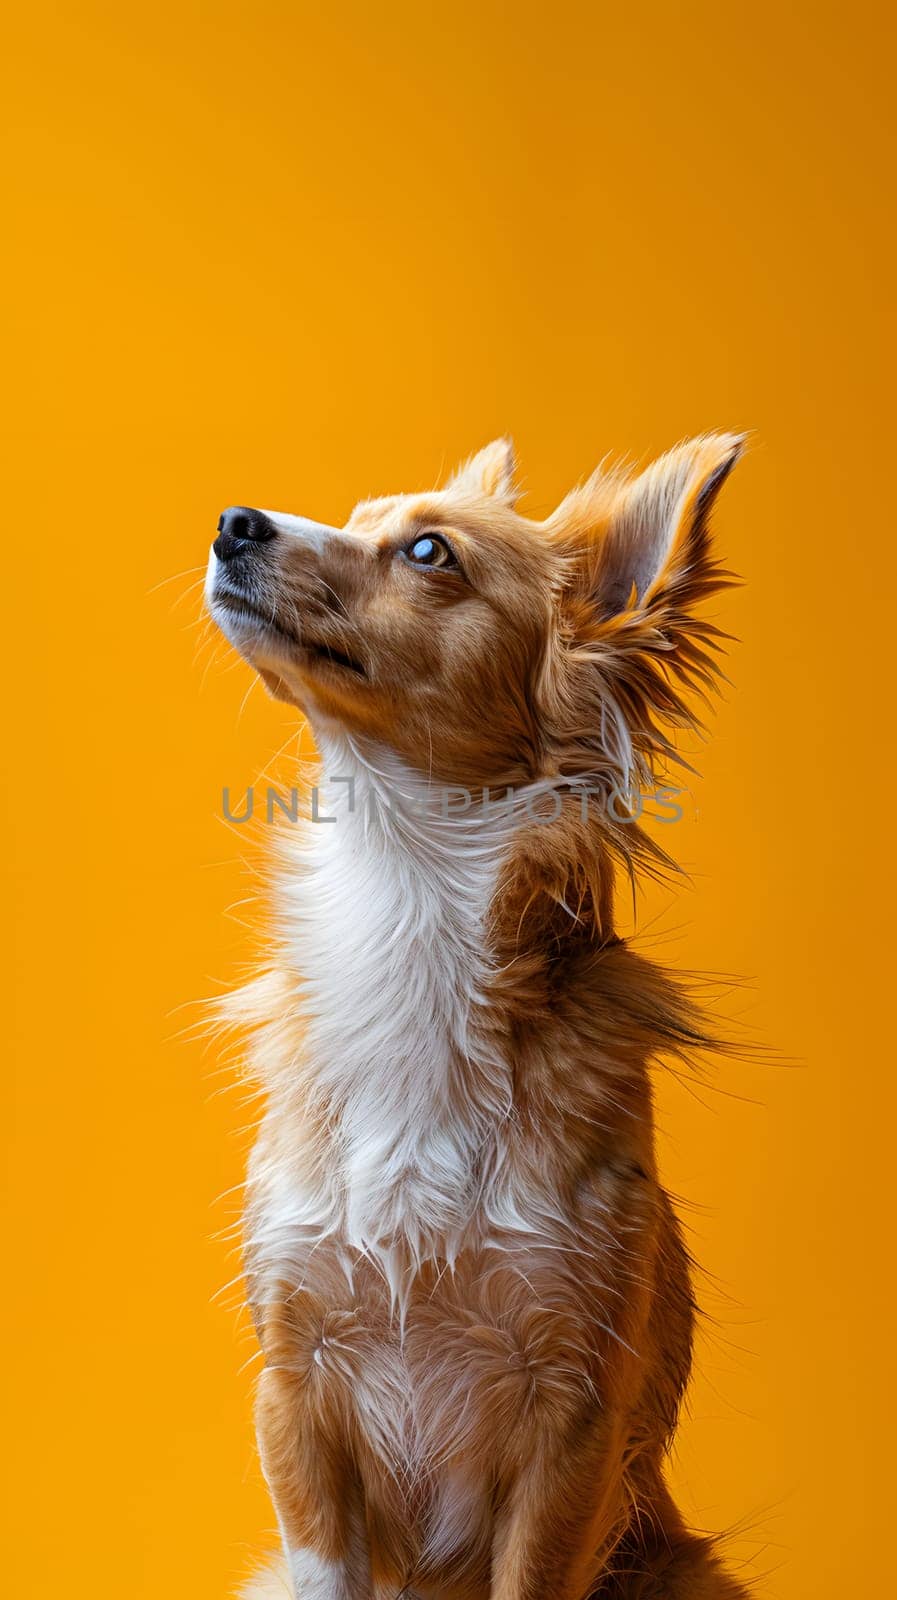 Fawncolored dog with white fur sitting on yellow background, gazing upward by Nadtochiy